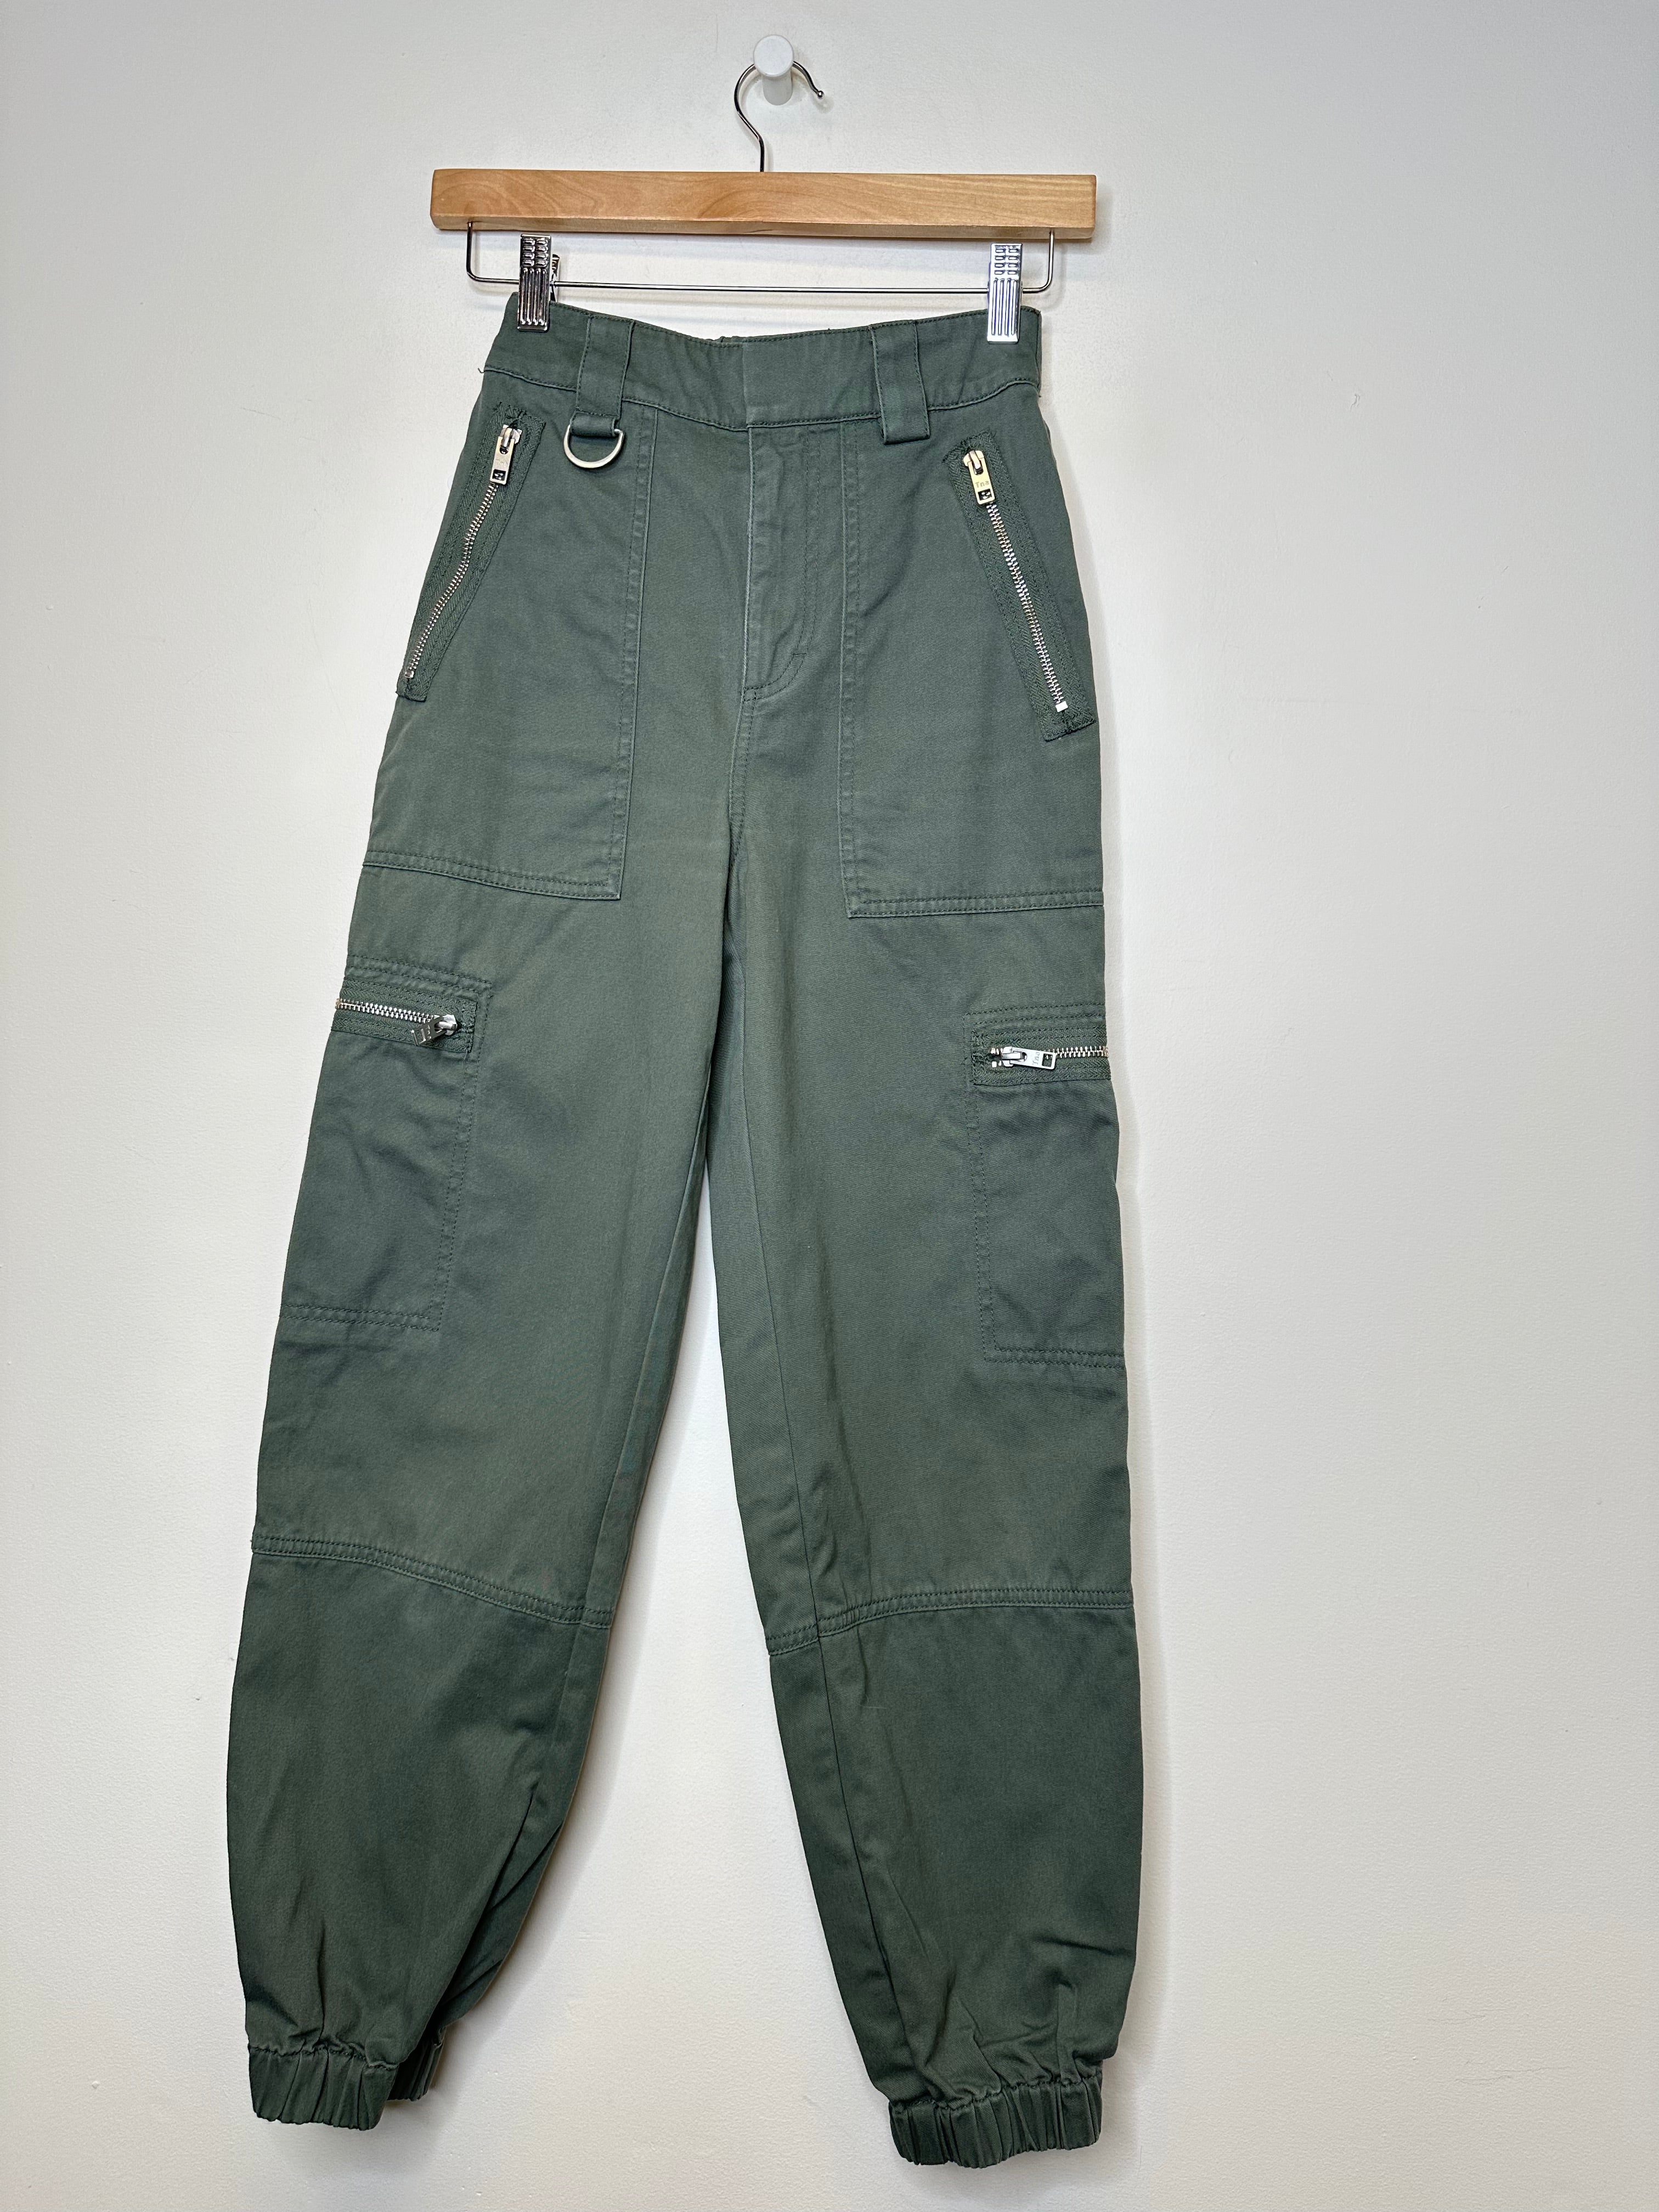 TNA Green Cargo Pants - XS - AS IS